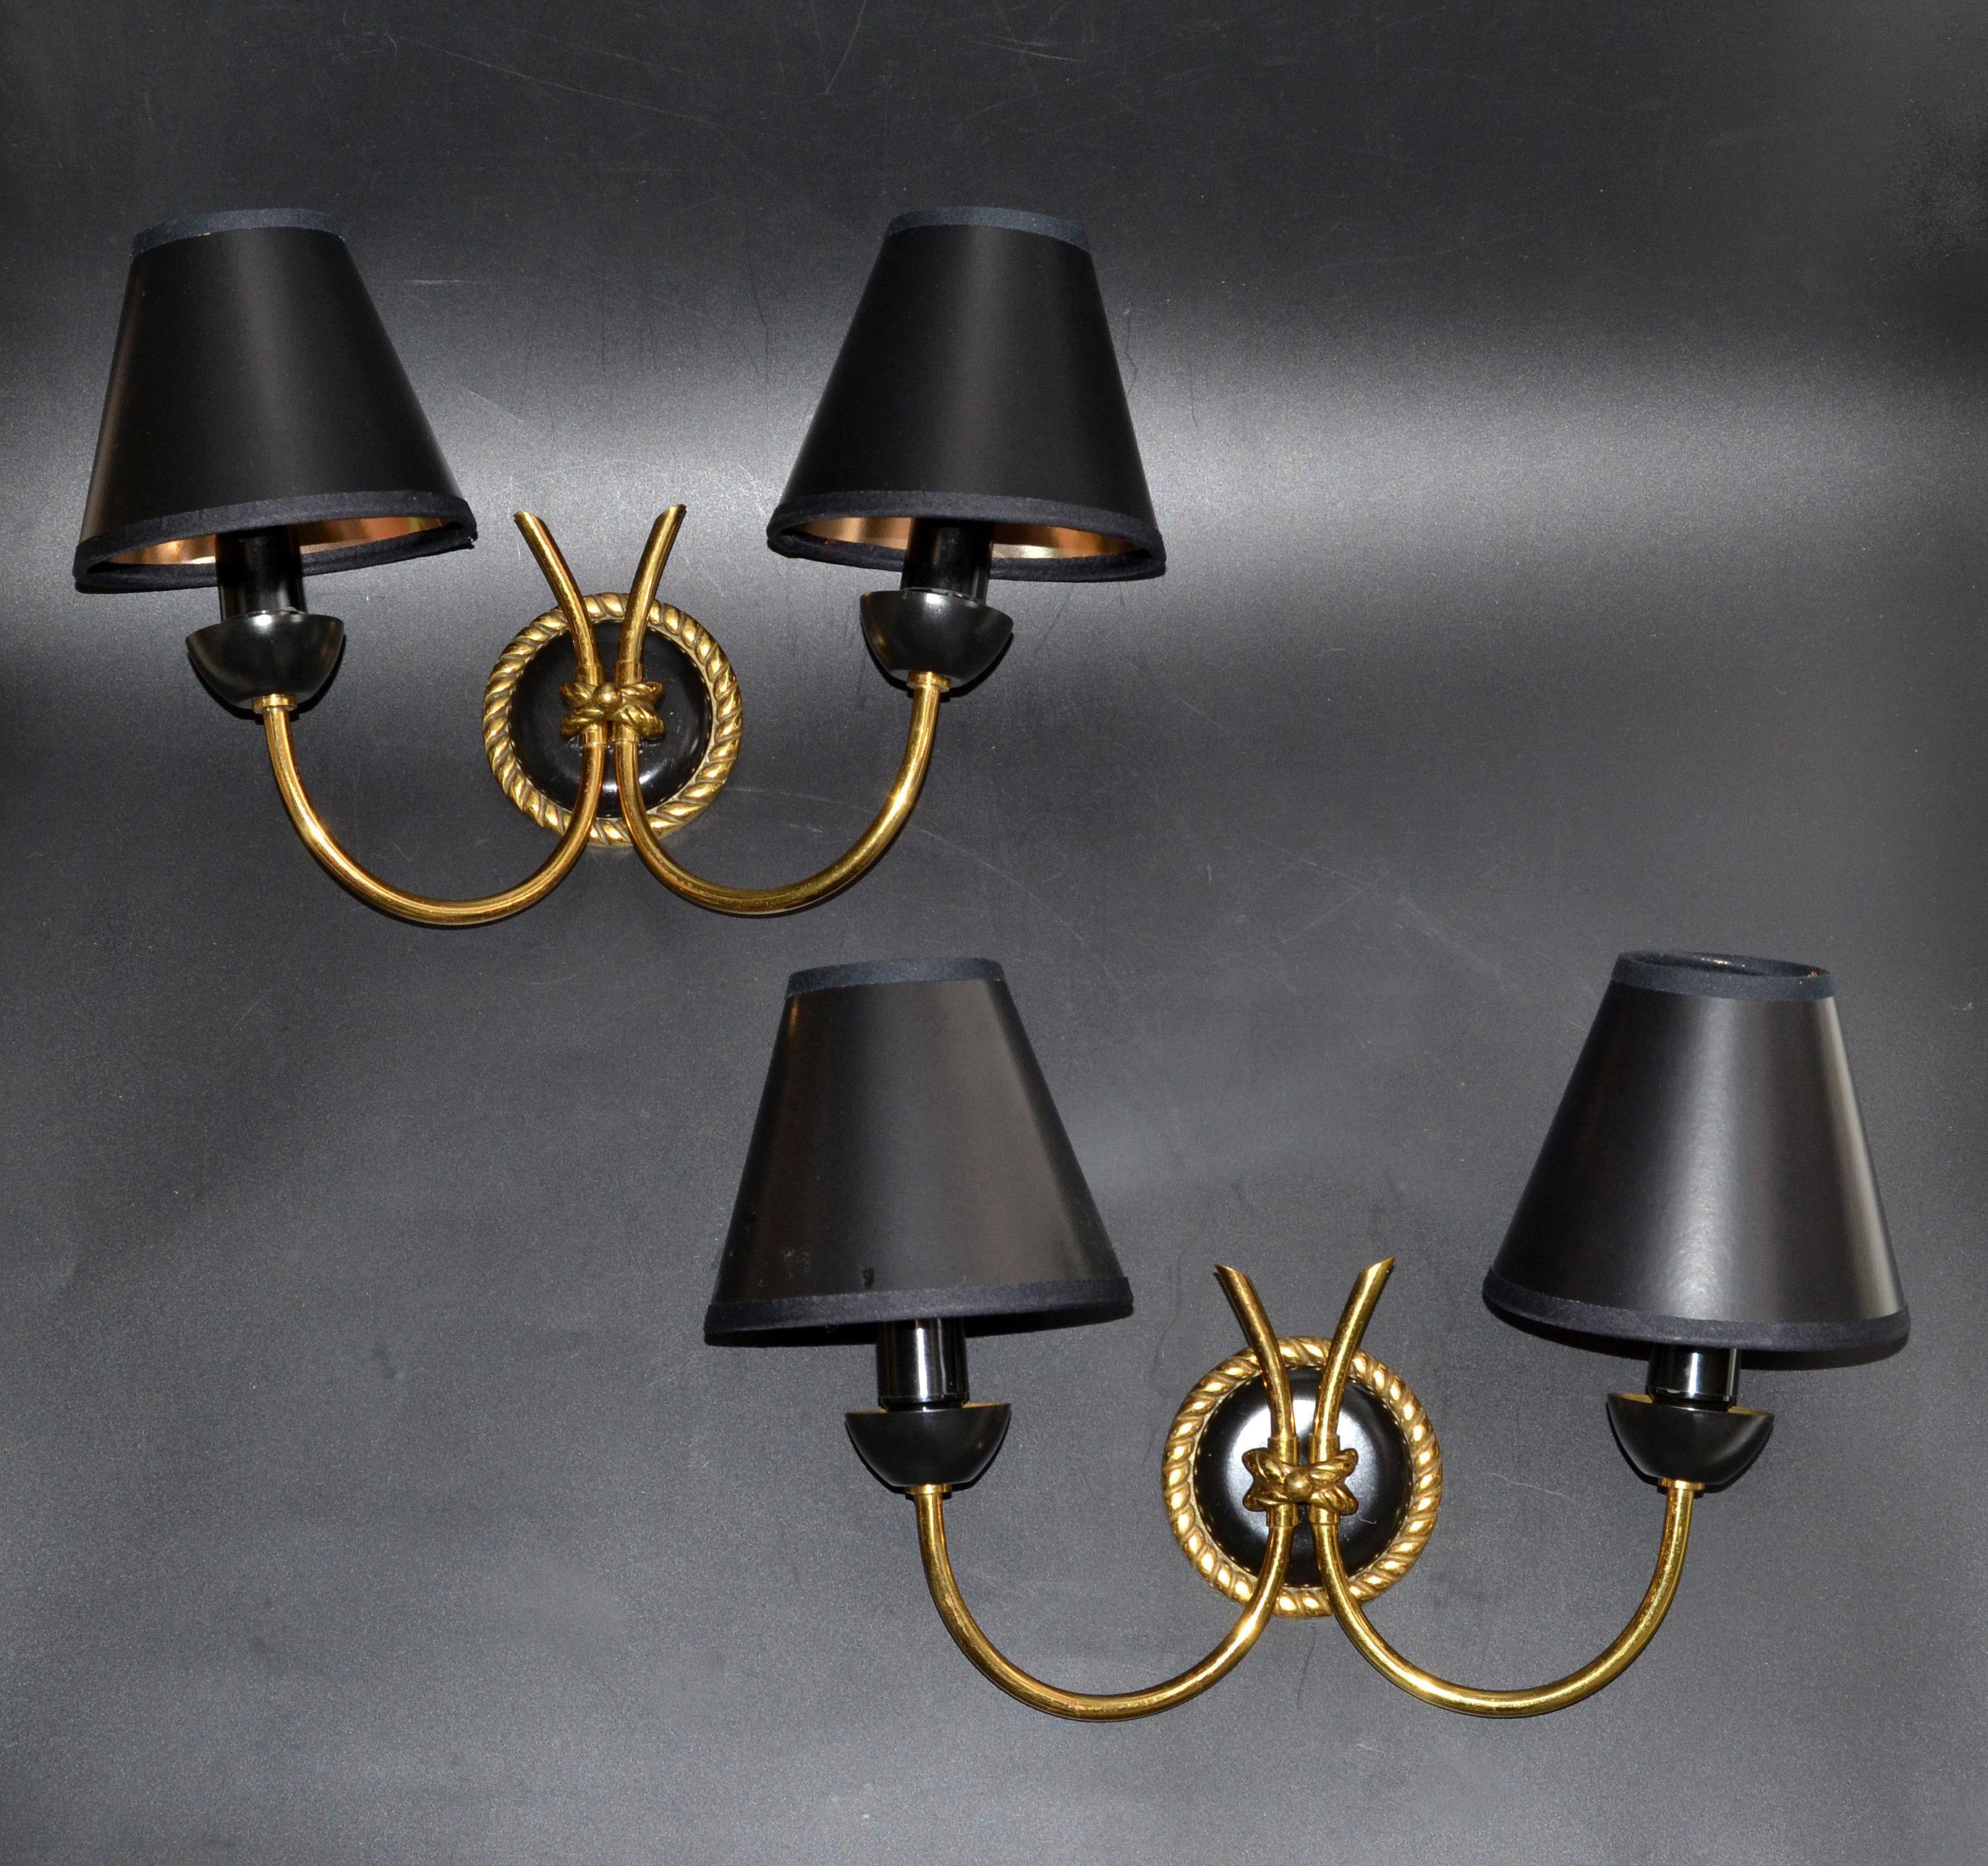 French Neoclassical Arlus Brass & Gun Metal Sconces Wall Lights Black & Gold Shades, 2